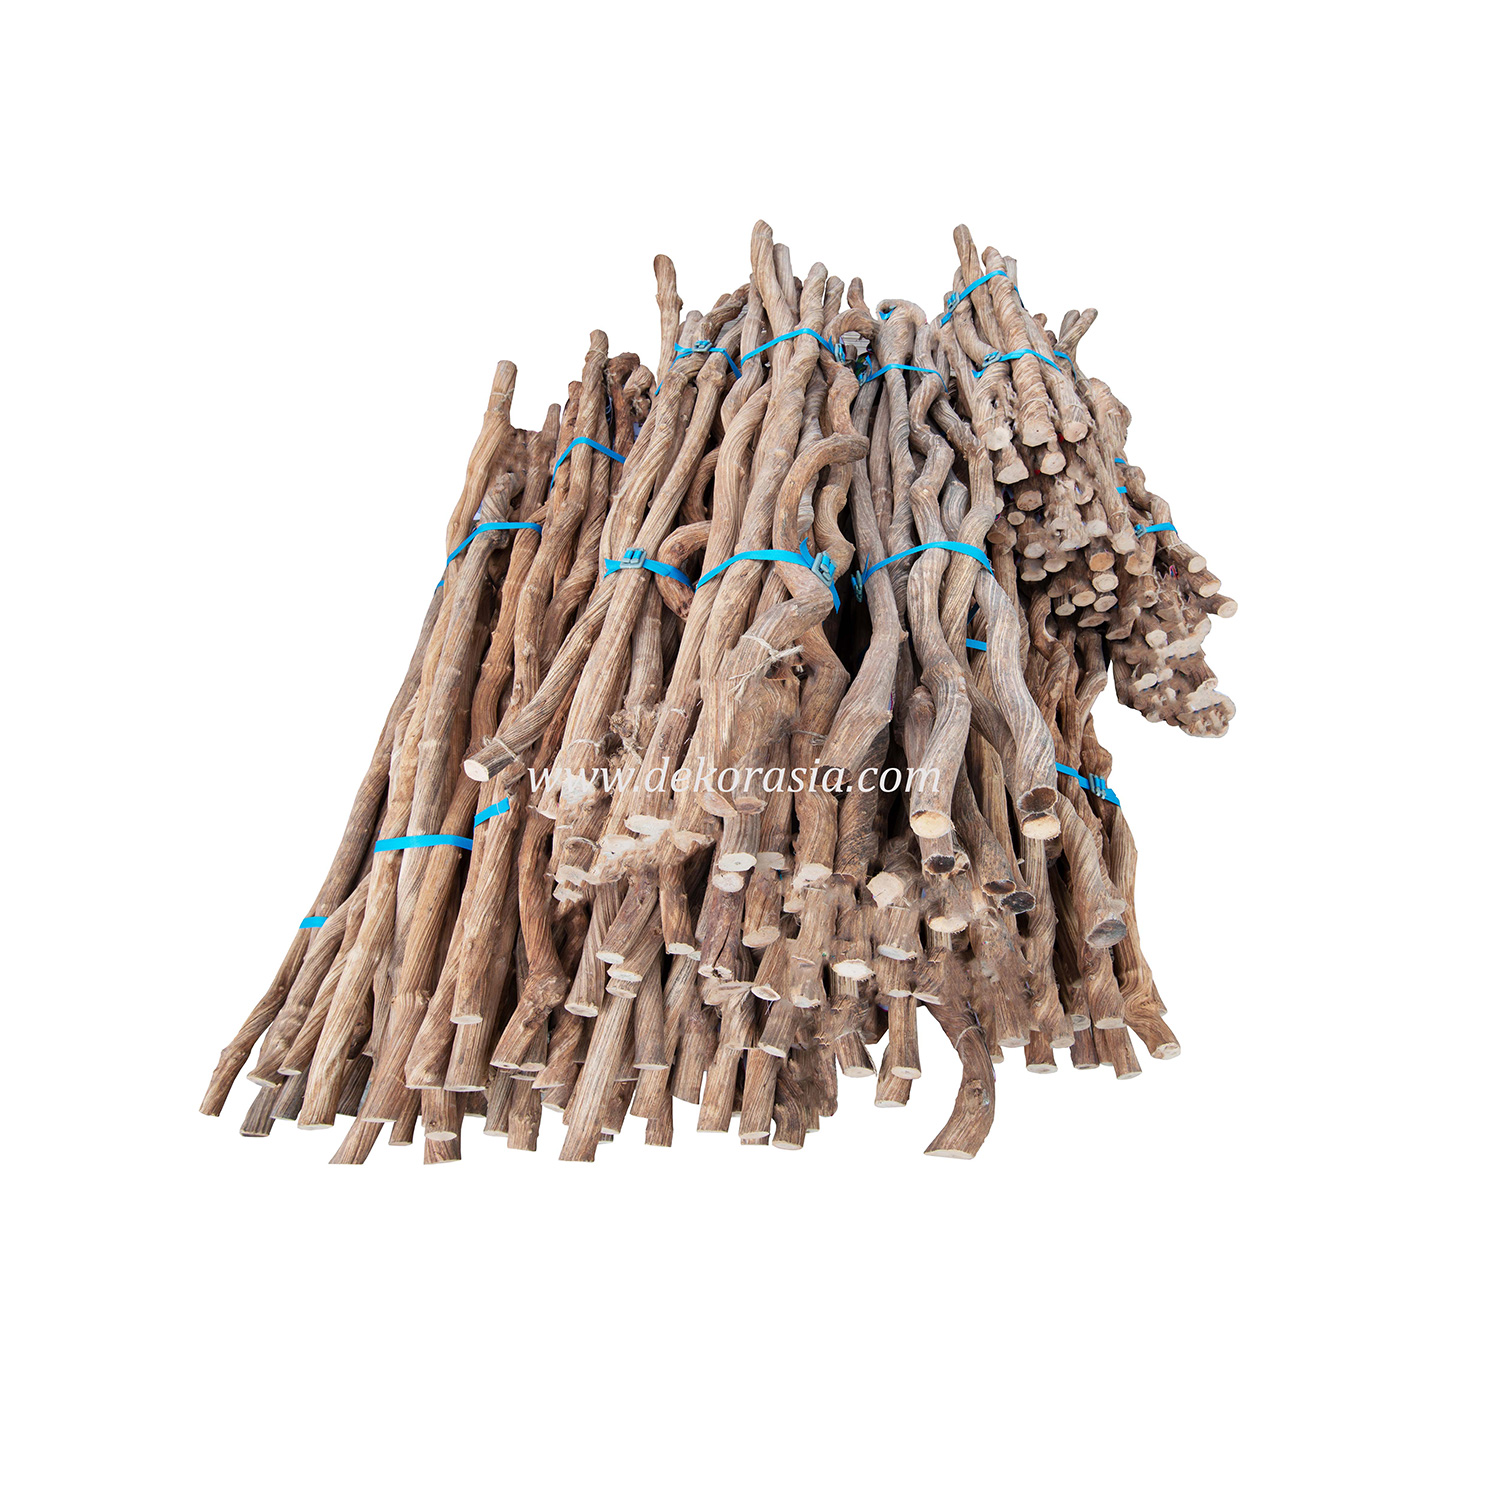 Java Wood for Cage Liana Vines Wood Natural Home Decoration Collect Home Decorative